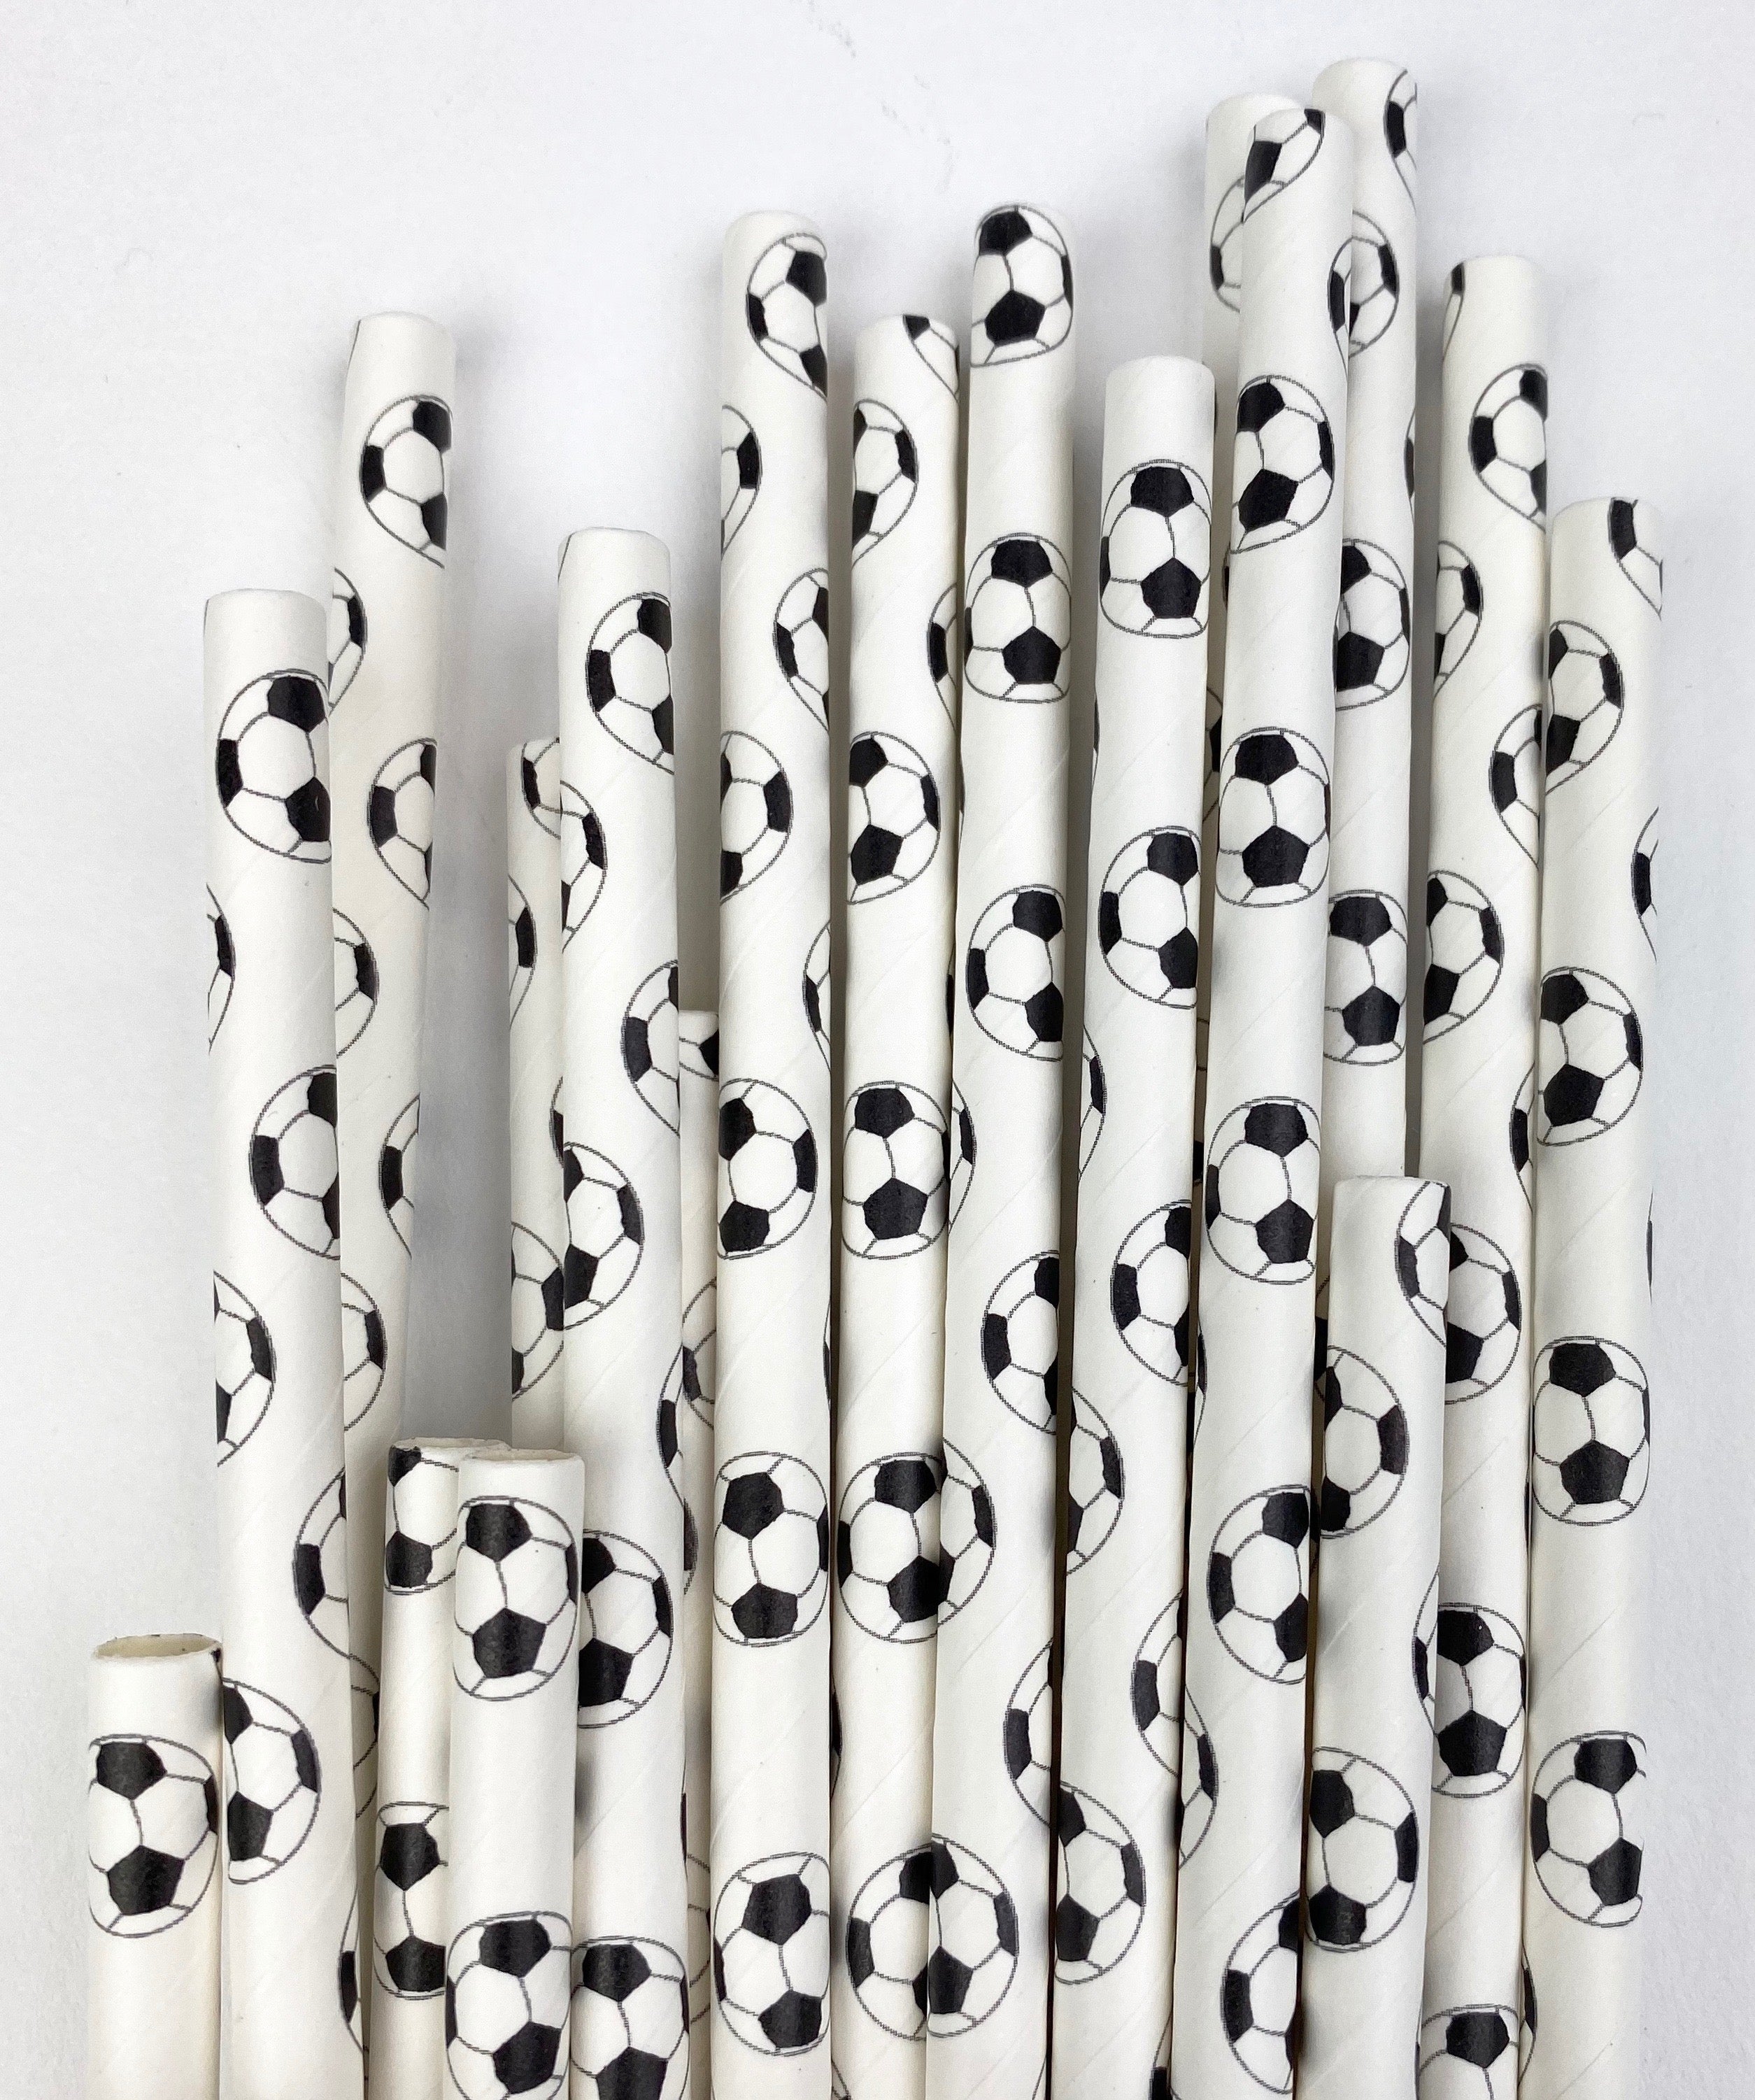 black and white soccer ball paper straw 